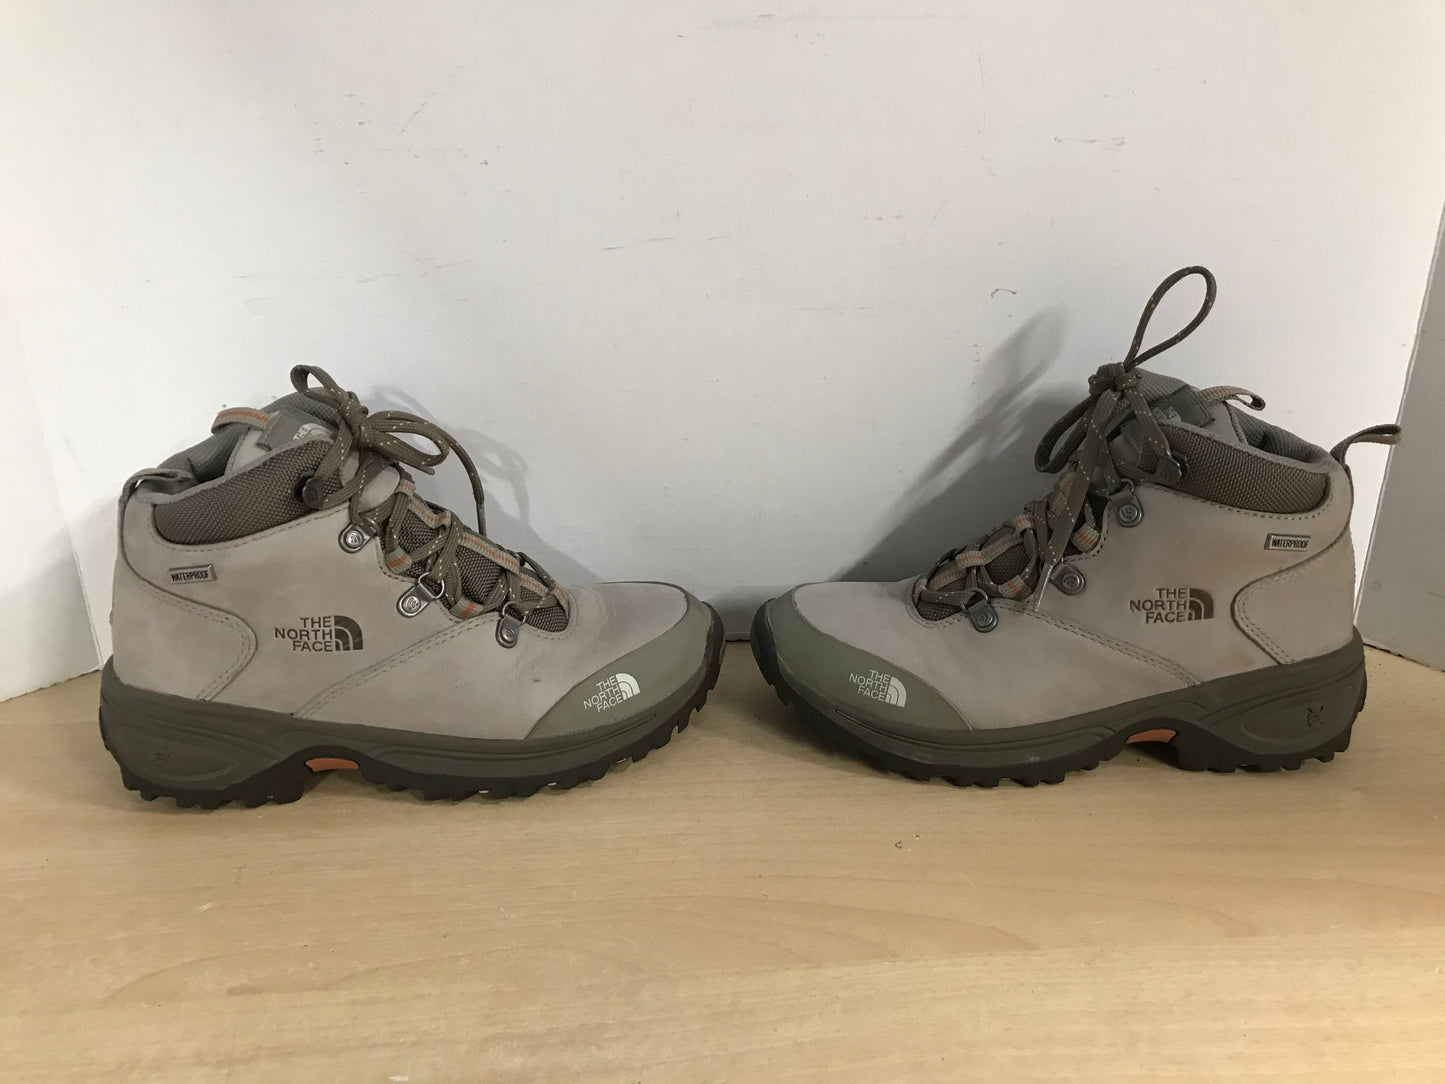 Hiking Boots Ladies Size 6 The North Face Waterproof Tan As New